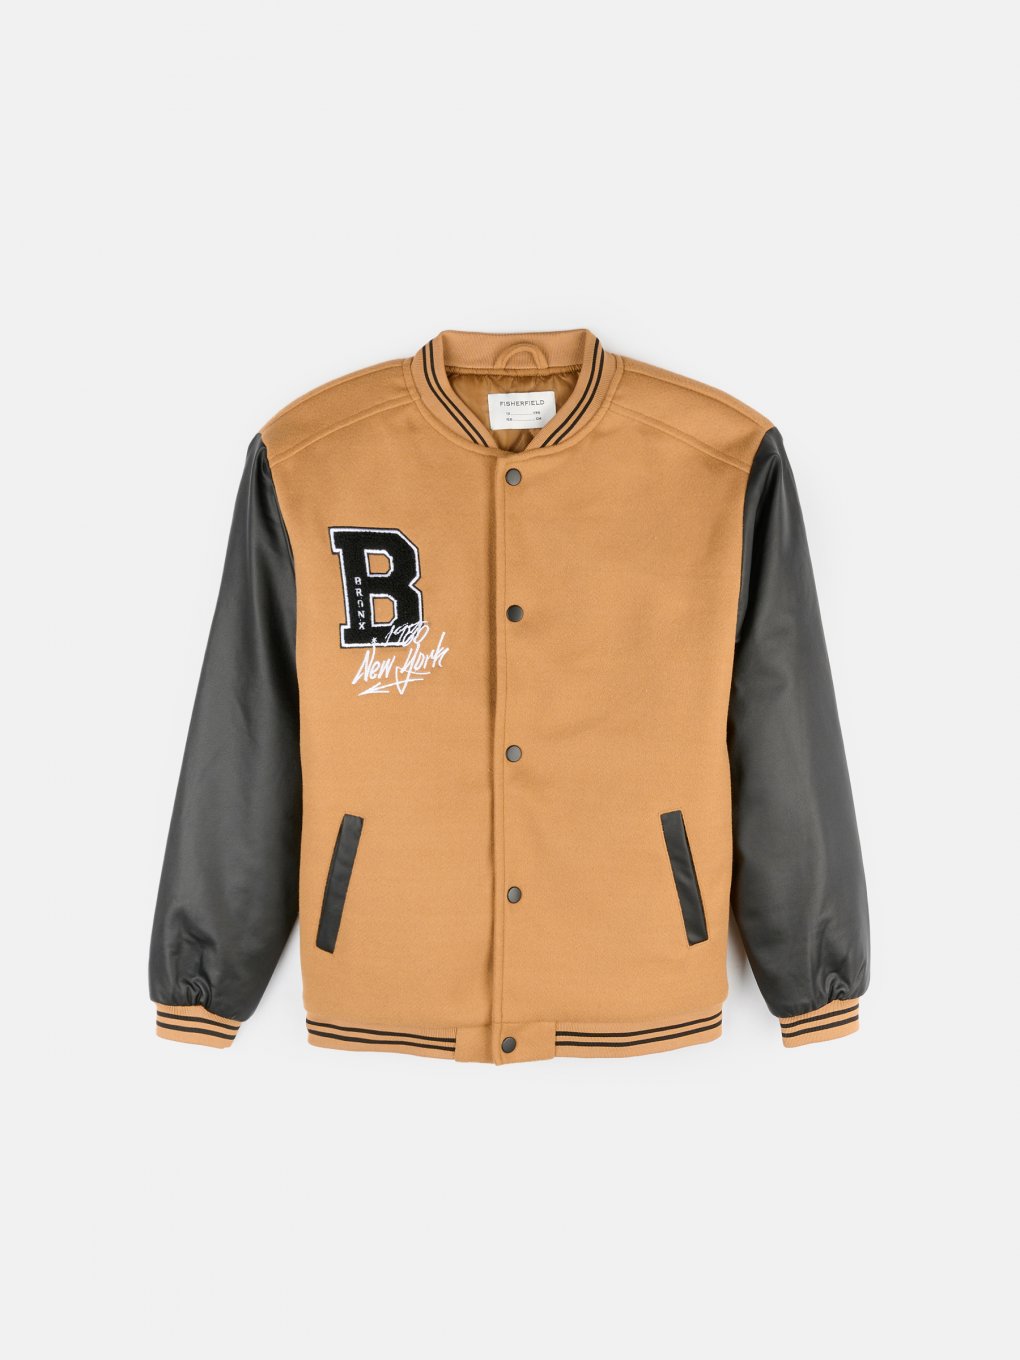 Varsity jacket with faux leather sleeves